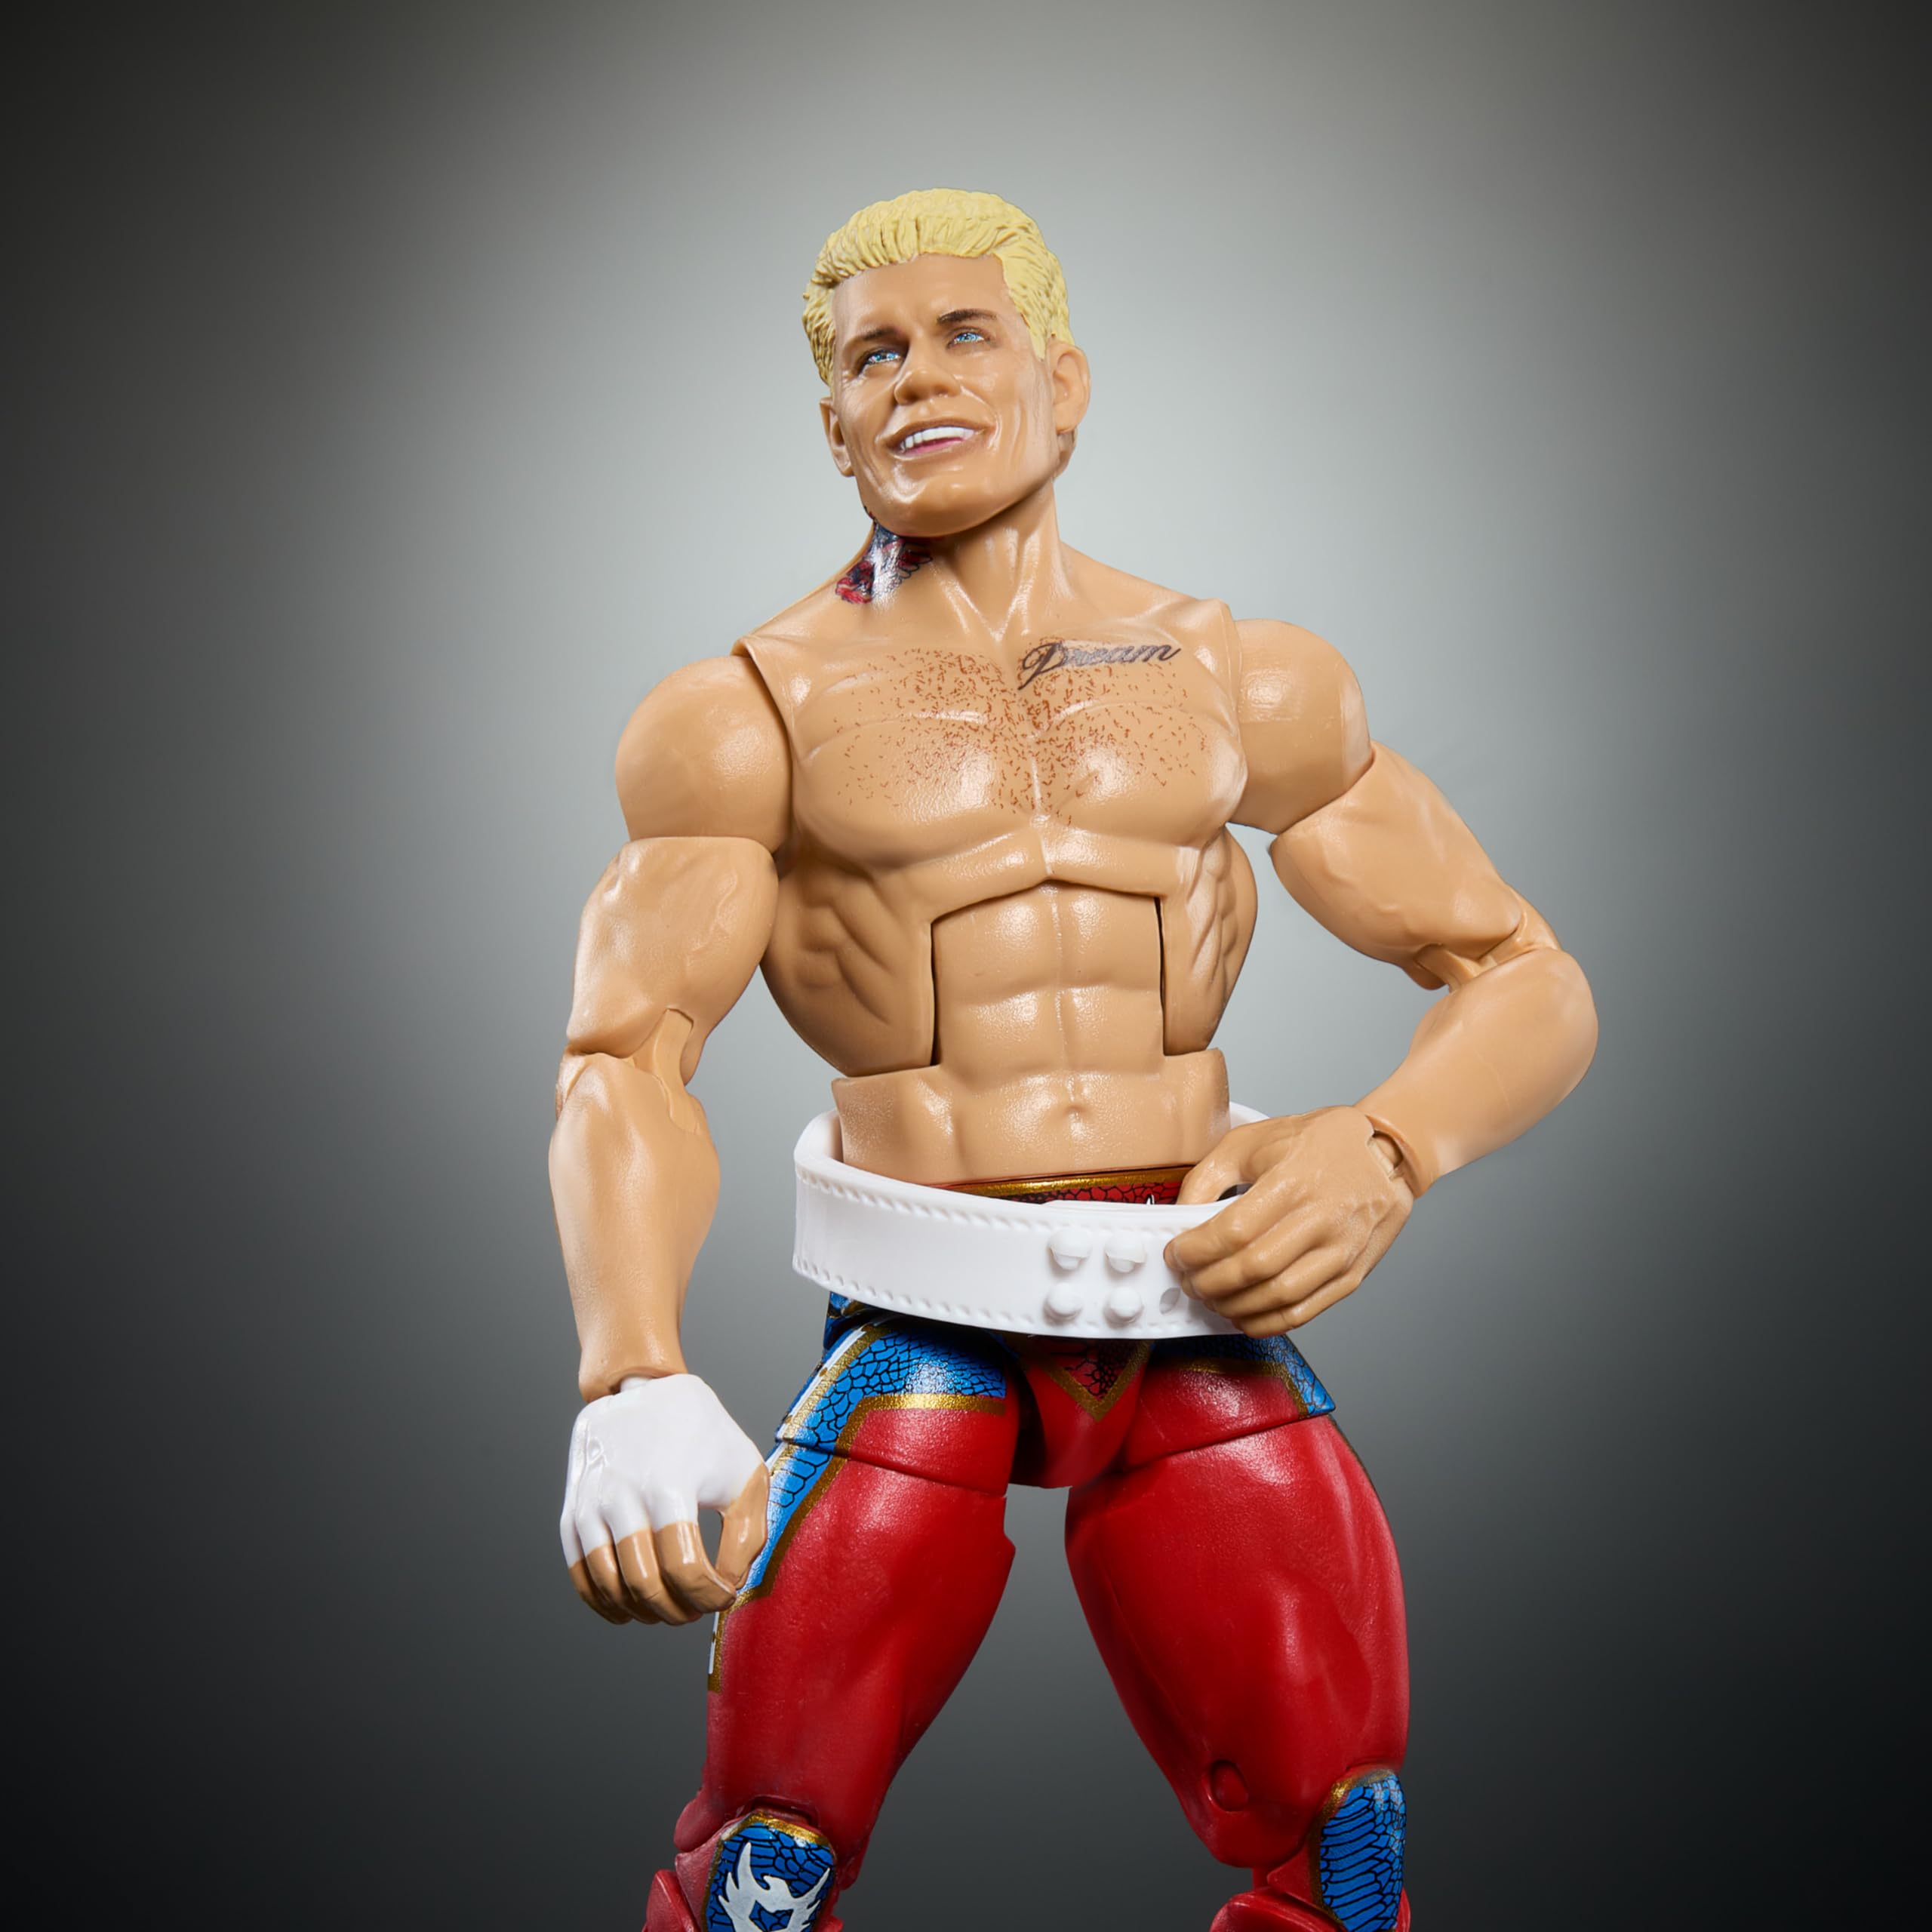 ​WWE Top Picks Elite Action Figure & Accessories Set, “The American Nightmare” Cody Rhodes 6-inch Collectible with Swappable Hands, Ring Gear & 25 Articulation Points​